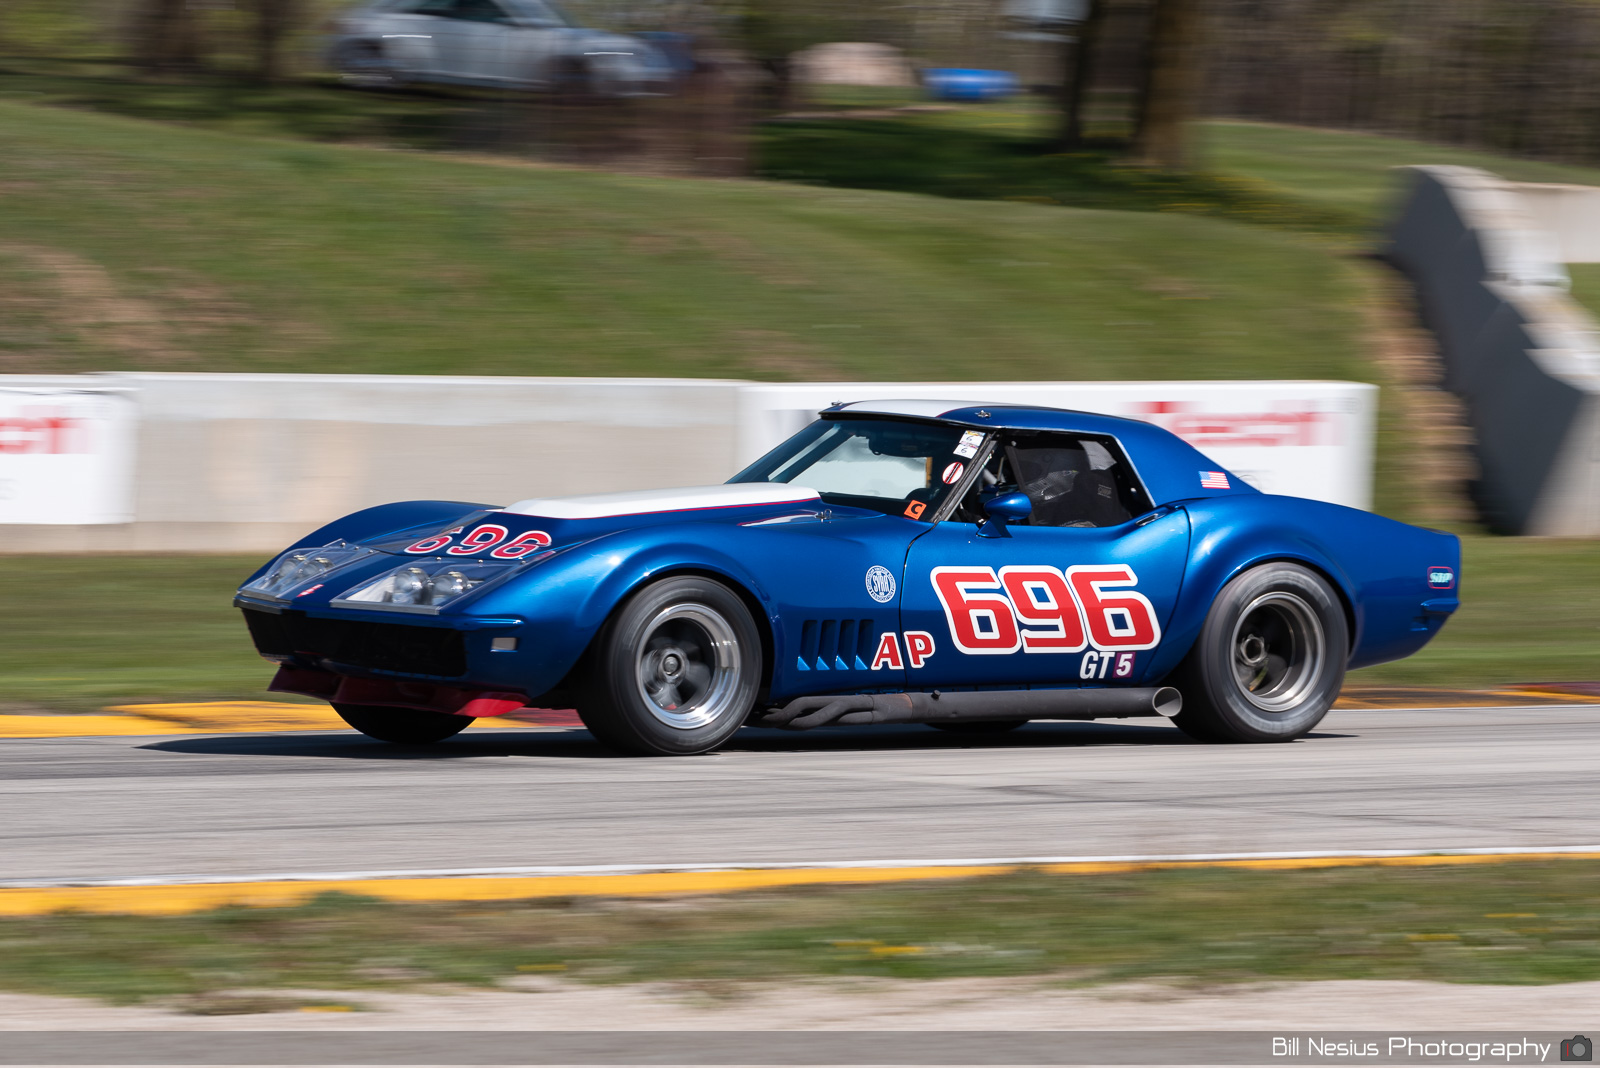 1969 Chevy Corvette Number 696 / BAN_0256 / 3